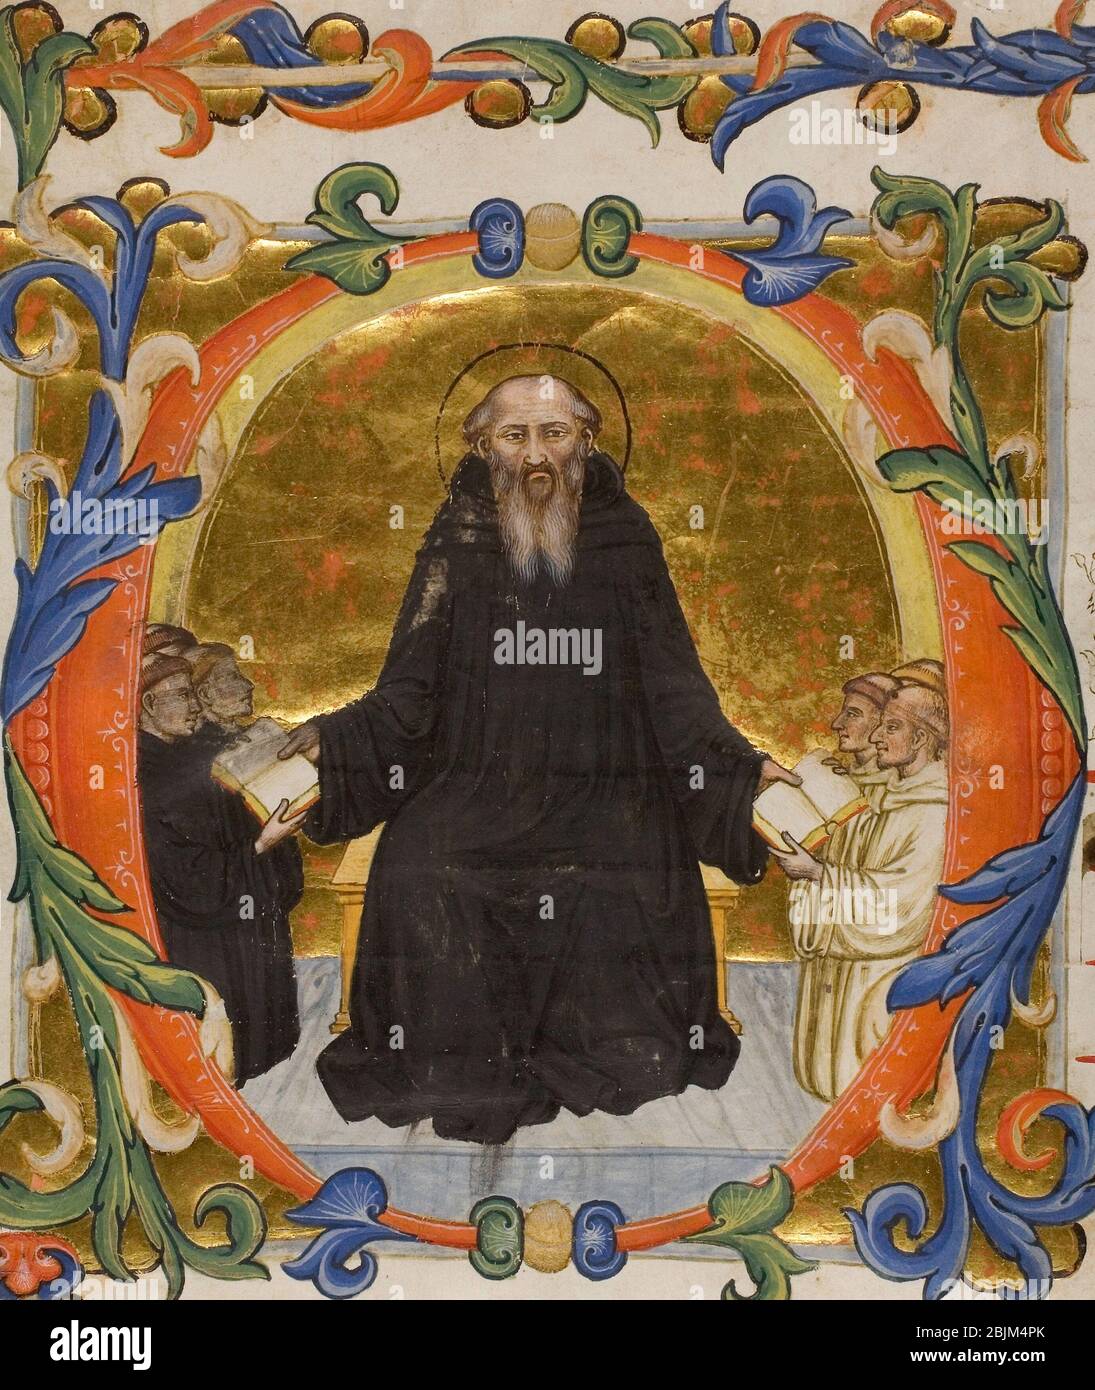 Author: Nicol di Giacomo da Bologna. Saint Benedict Presenting his Rule to Benedictine and Cistercian Monks in a Historiated Initial 'O' from a Stock Photo